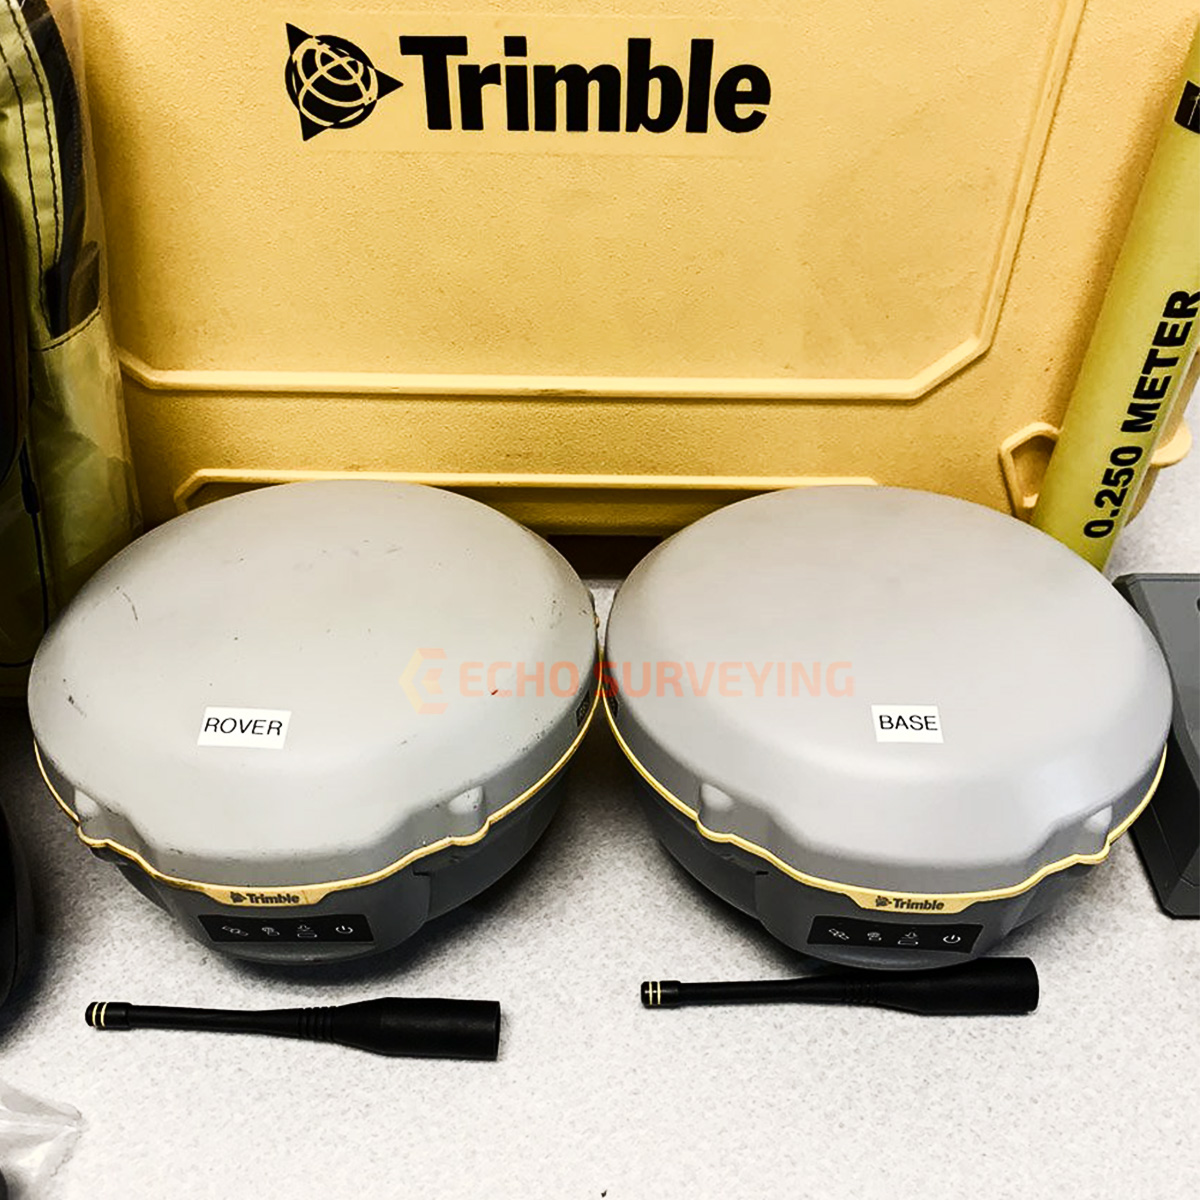 Trimble-R8s-Base-Rover-System-with-TSC3-Sale.jpg